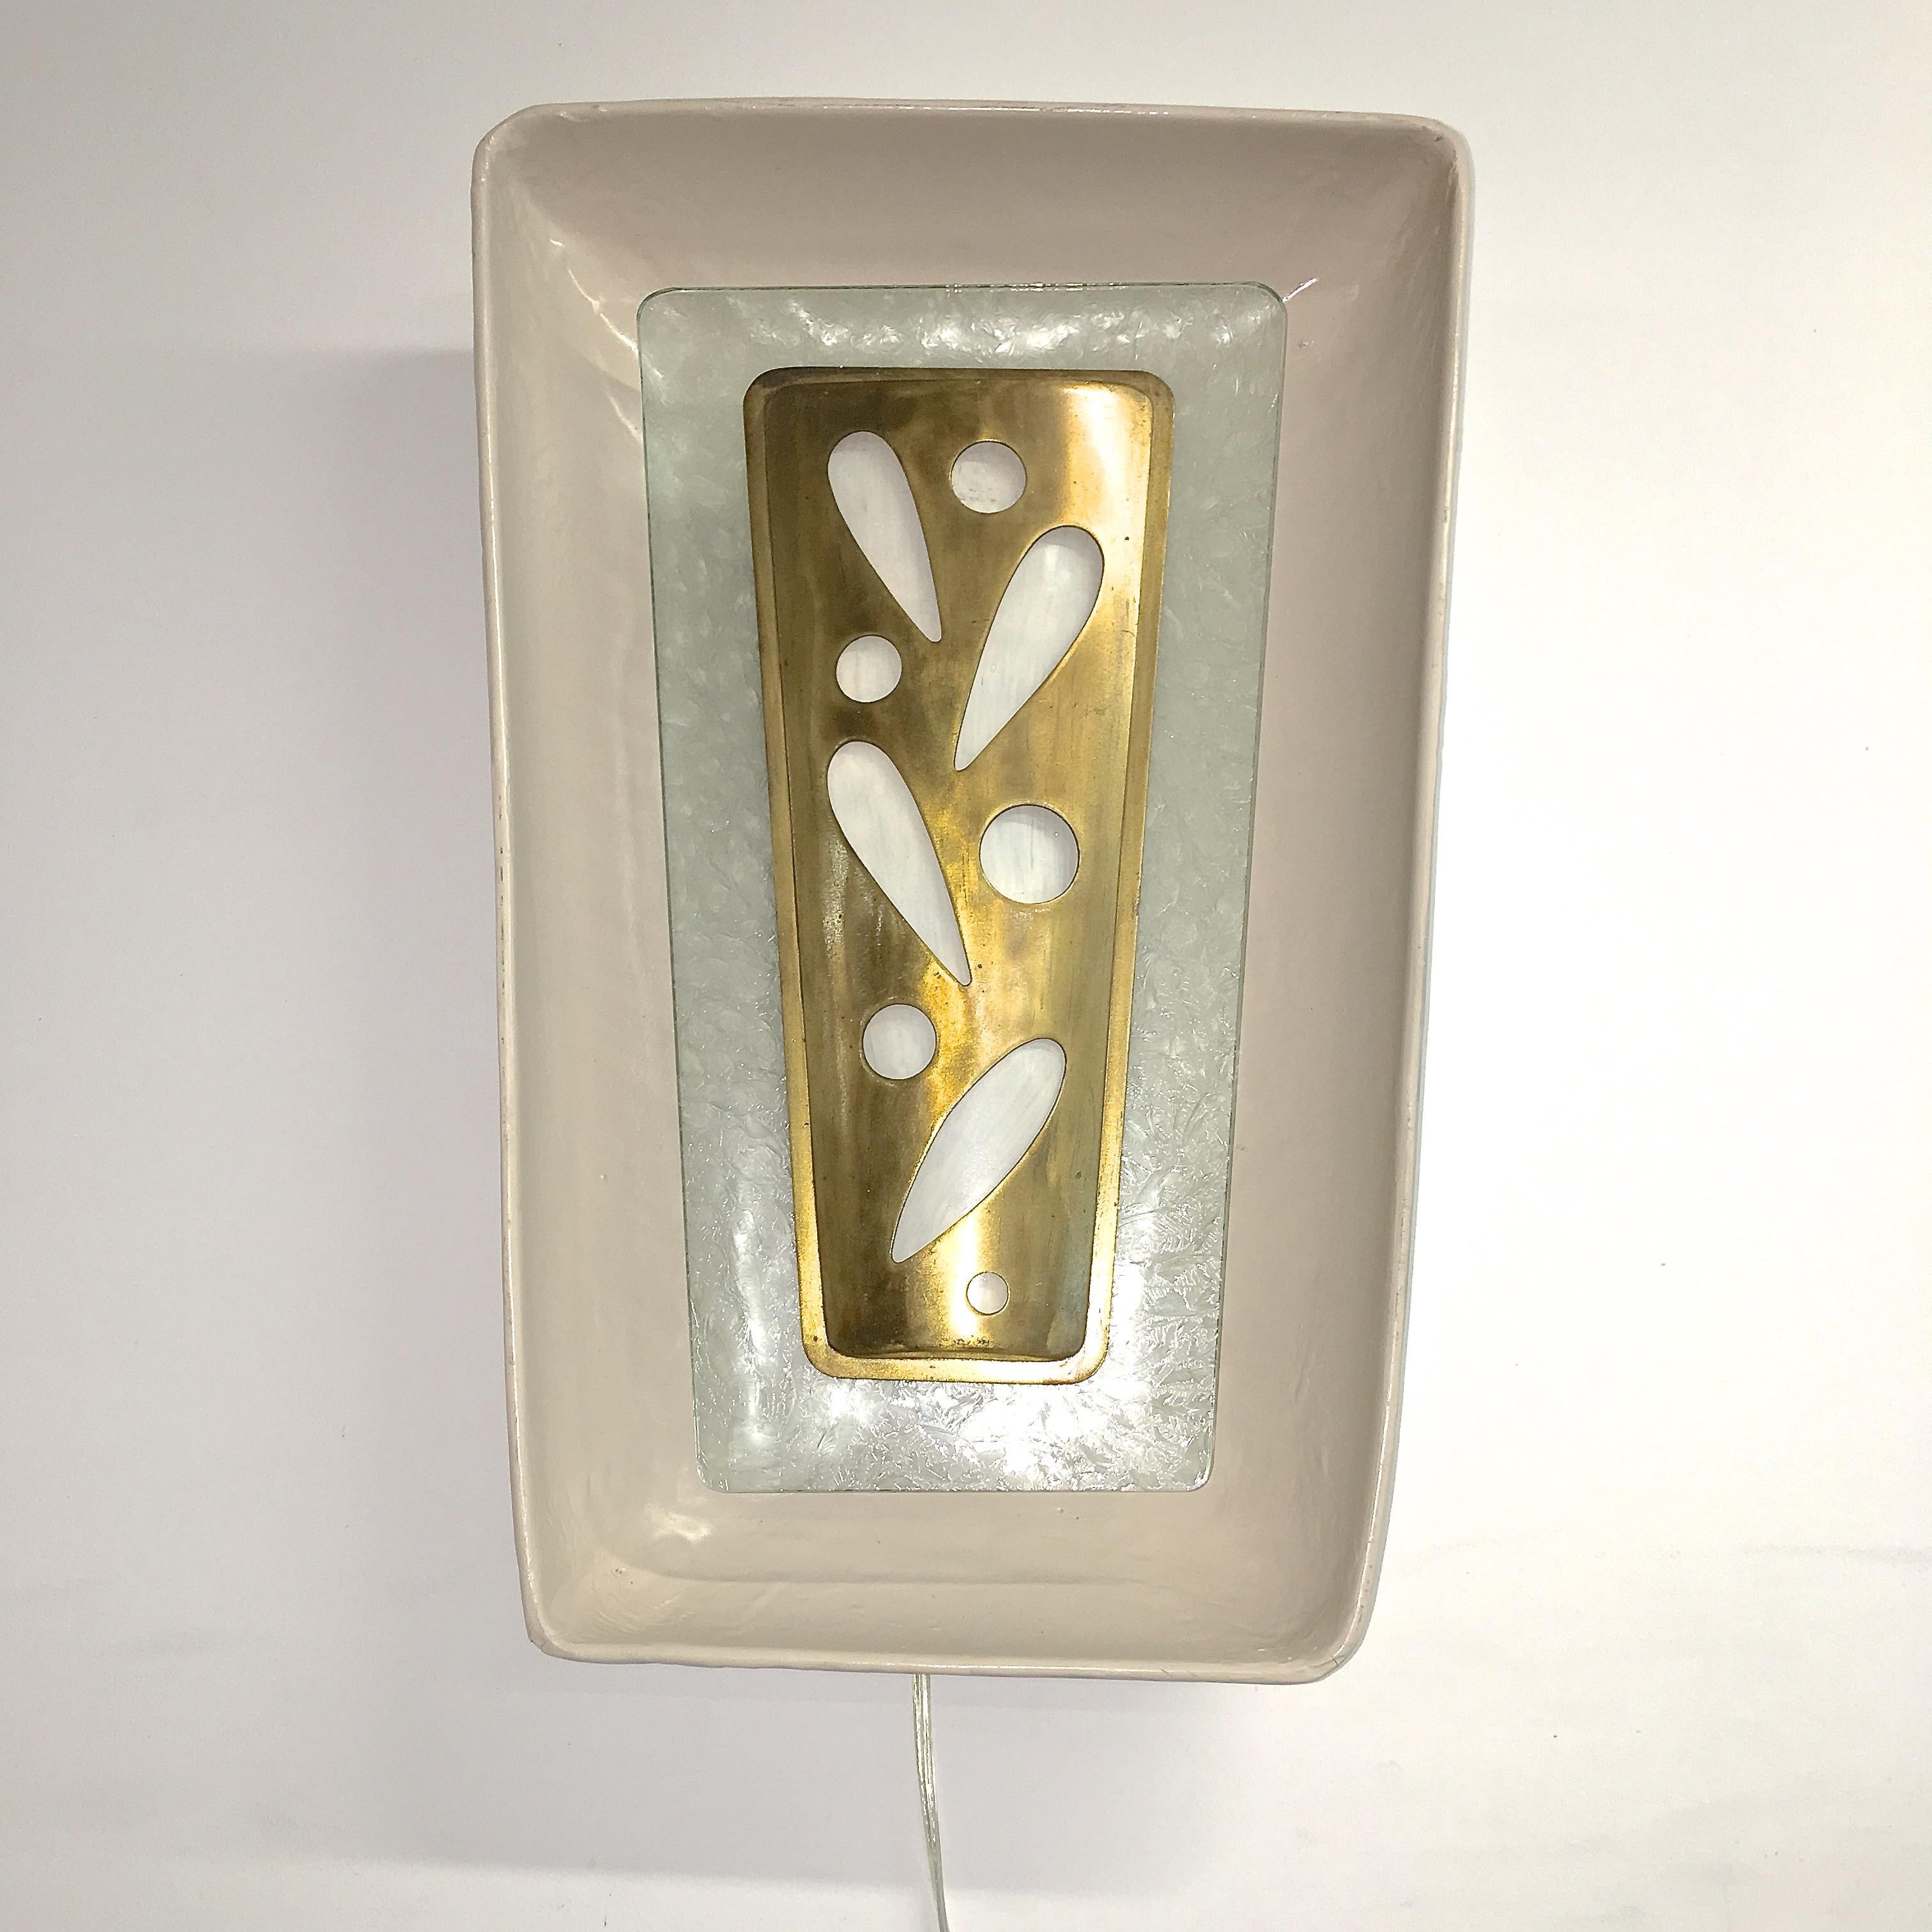 Gio Ponti Wall Sconce from the m/s Augustus Italian Ocean Liner 1951 For Sale 3